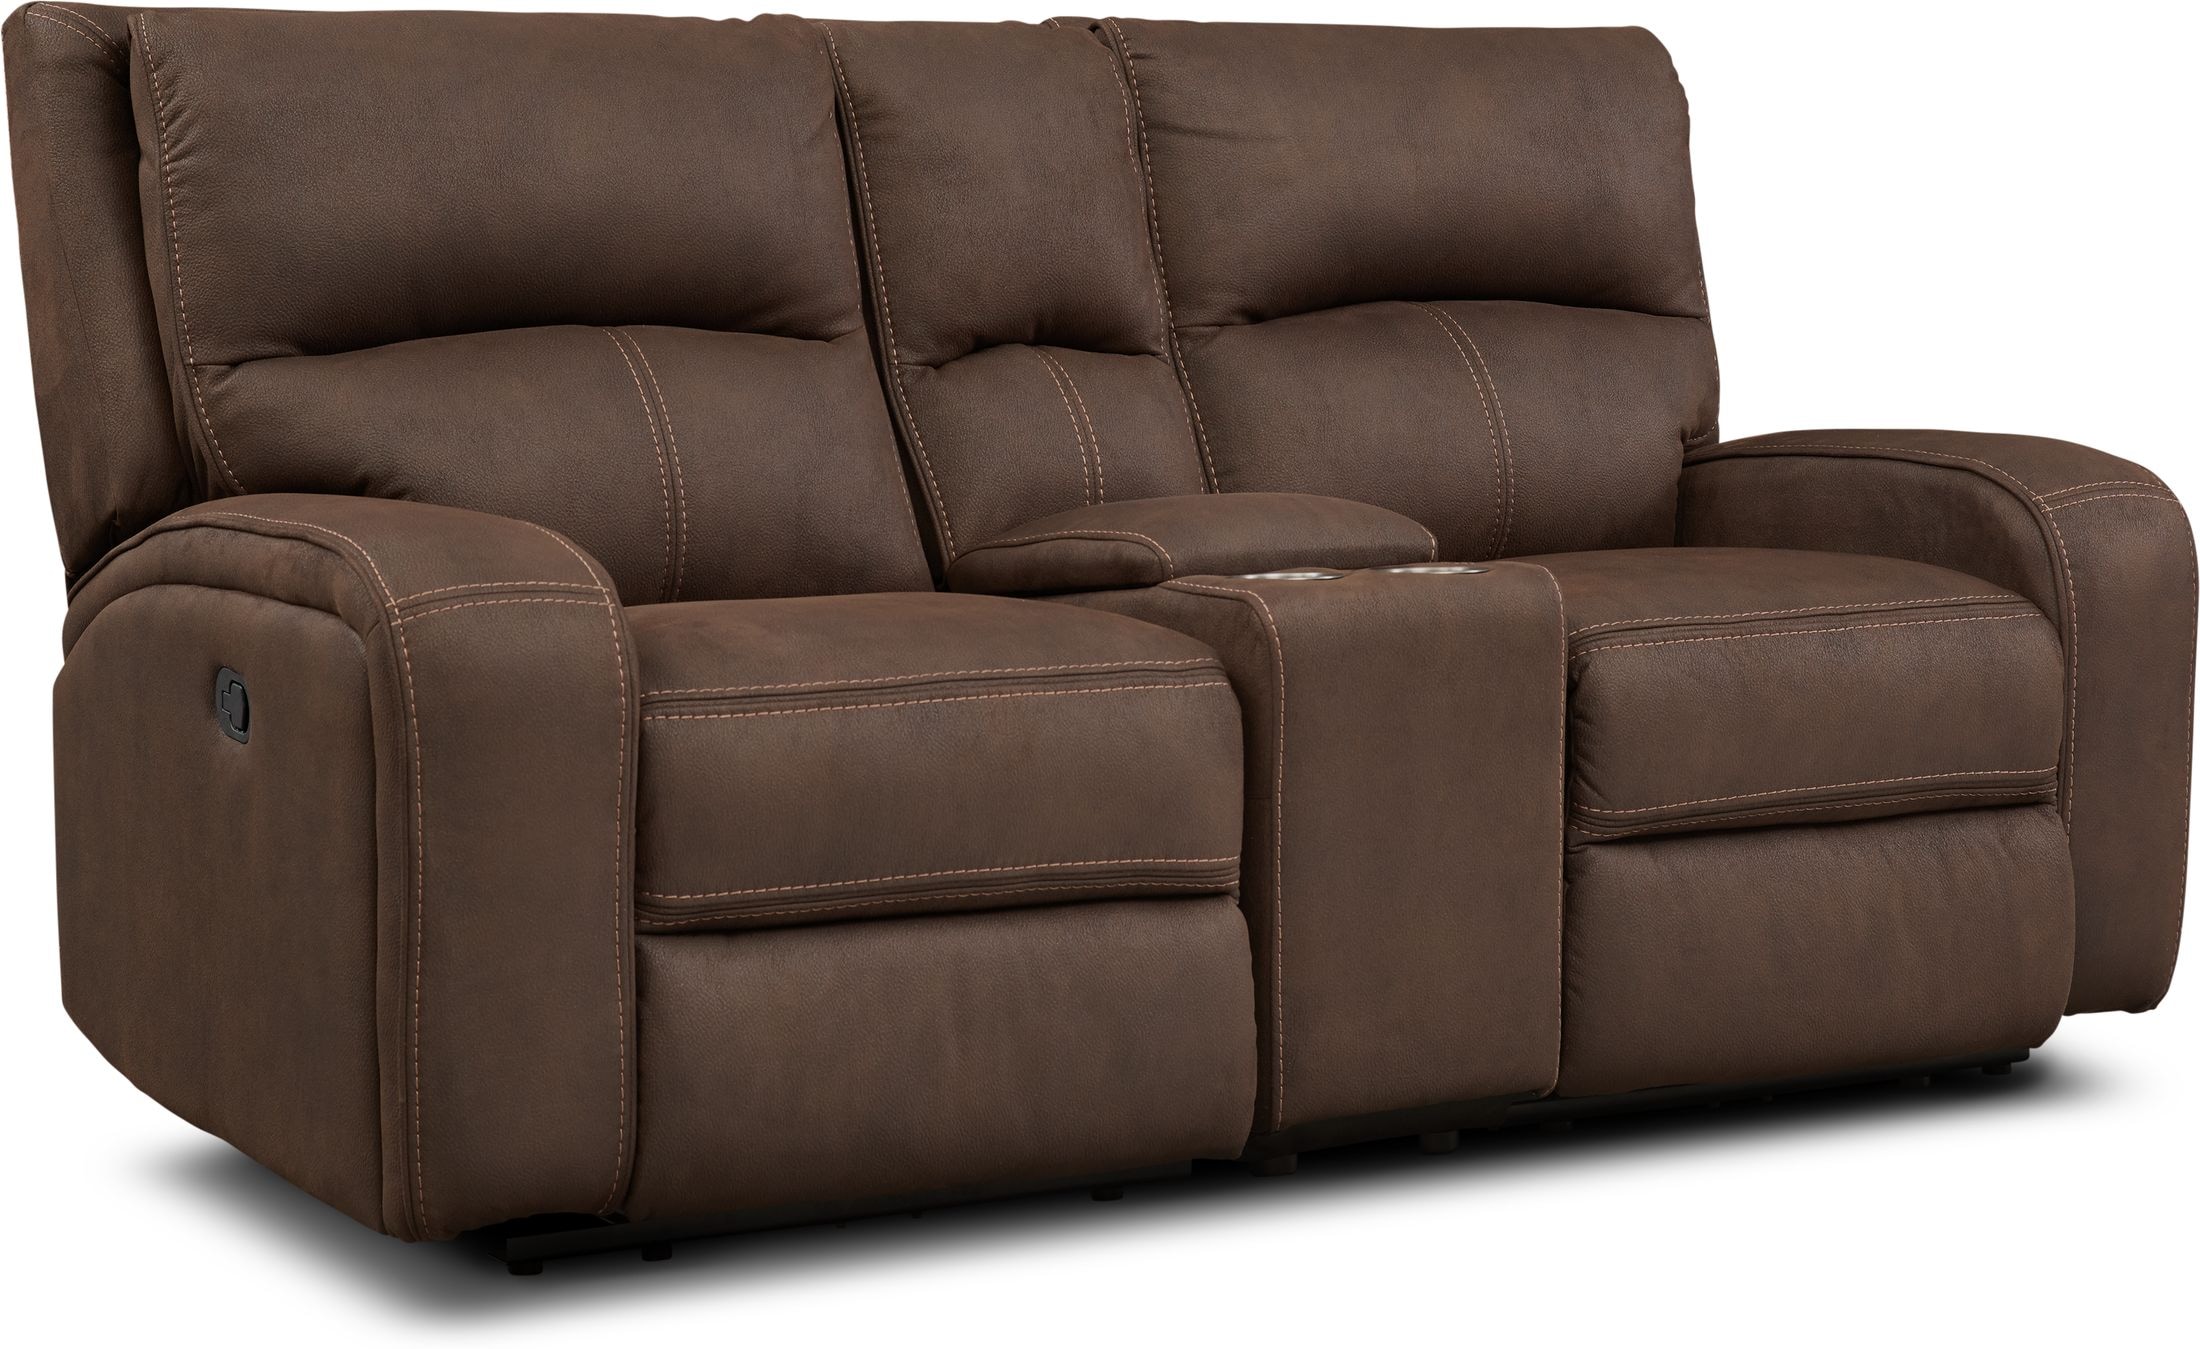 Undefined American Signature Furniture, Brown Leather Loveseat Recliner